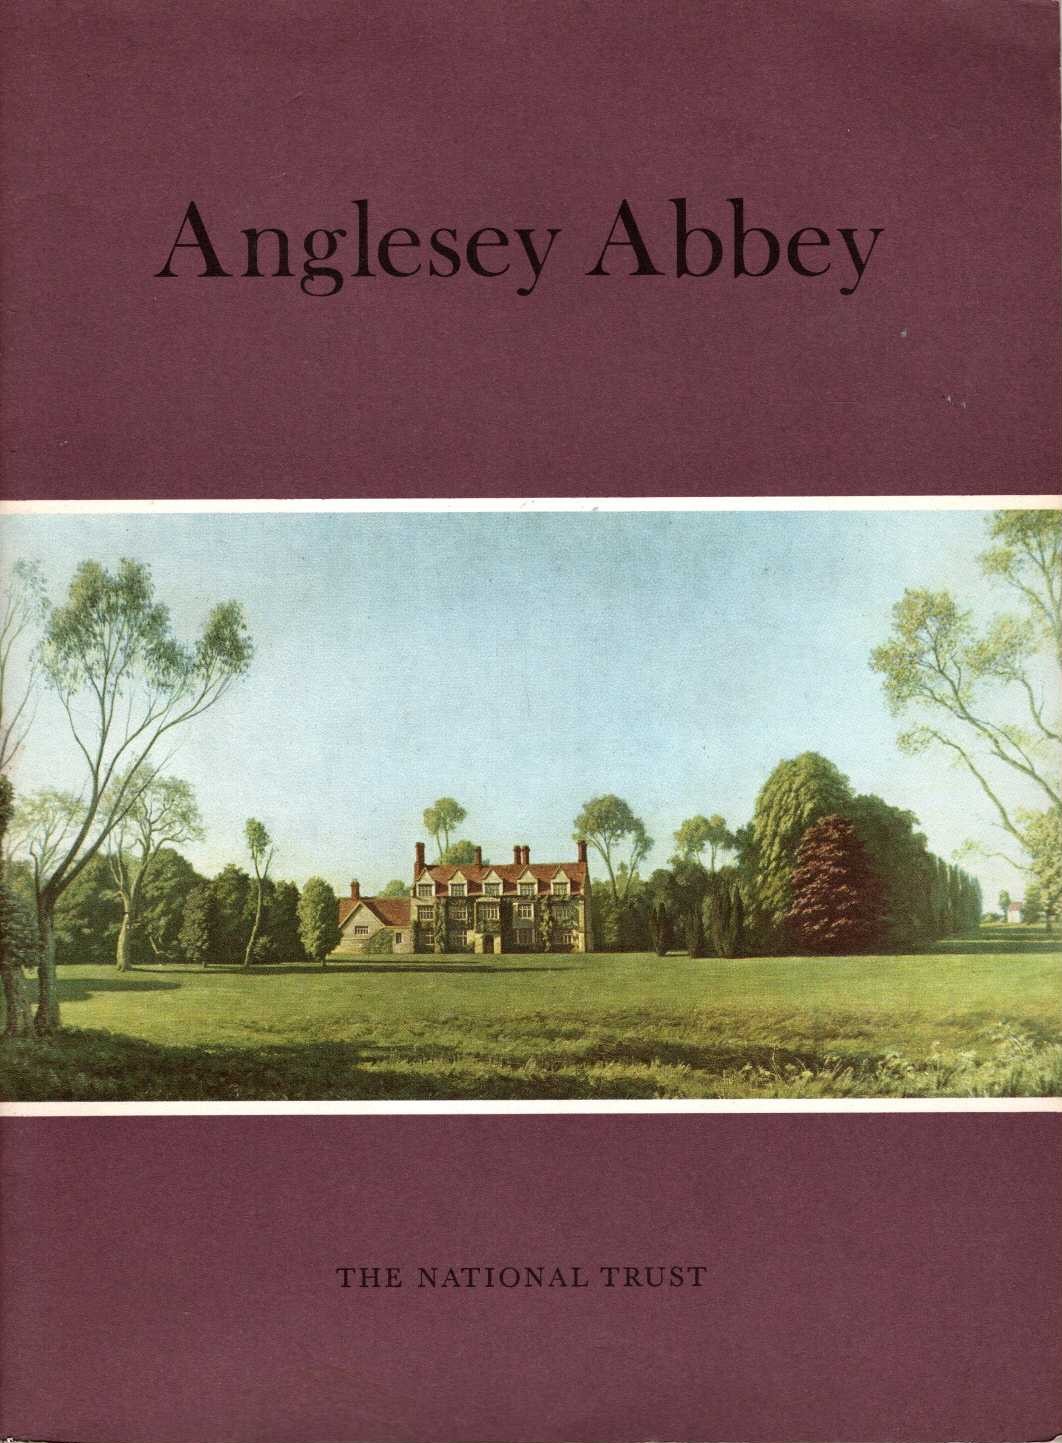 
\ ANGLESEY ABBEY by Robin Fedden front book cover image